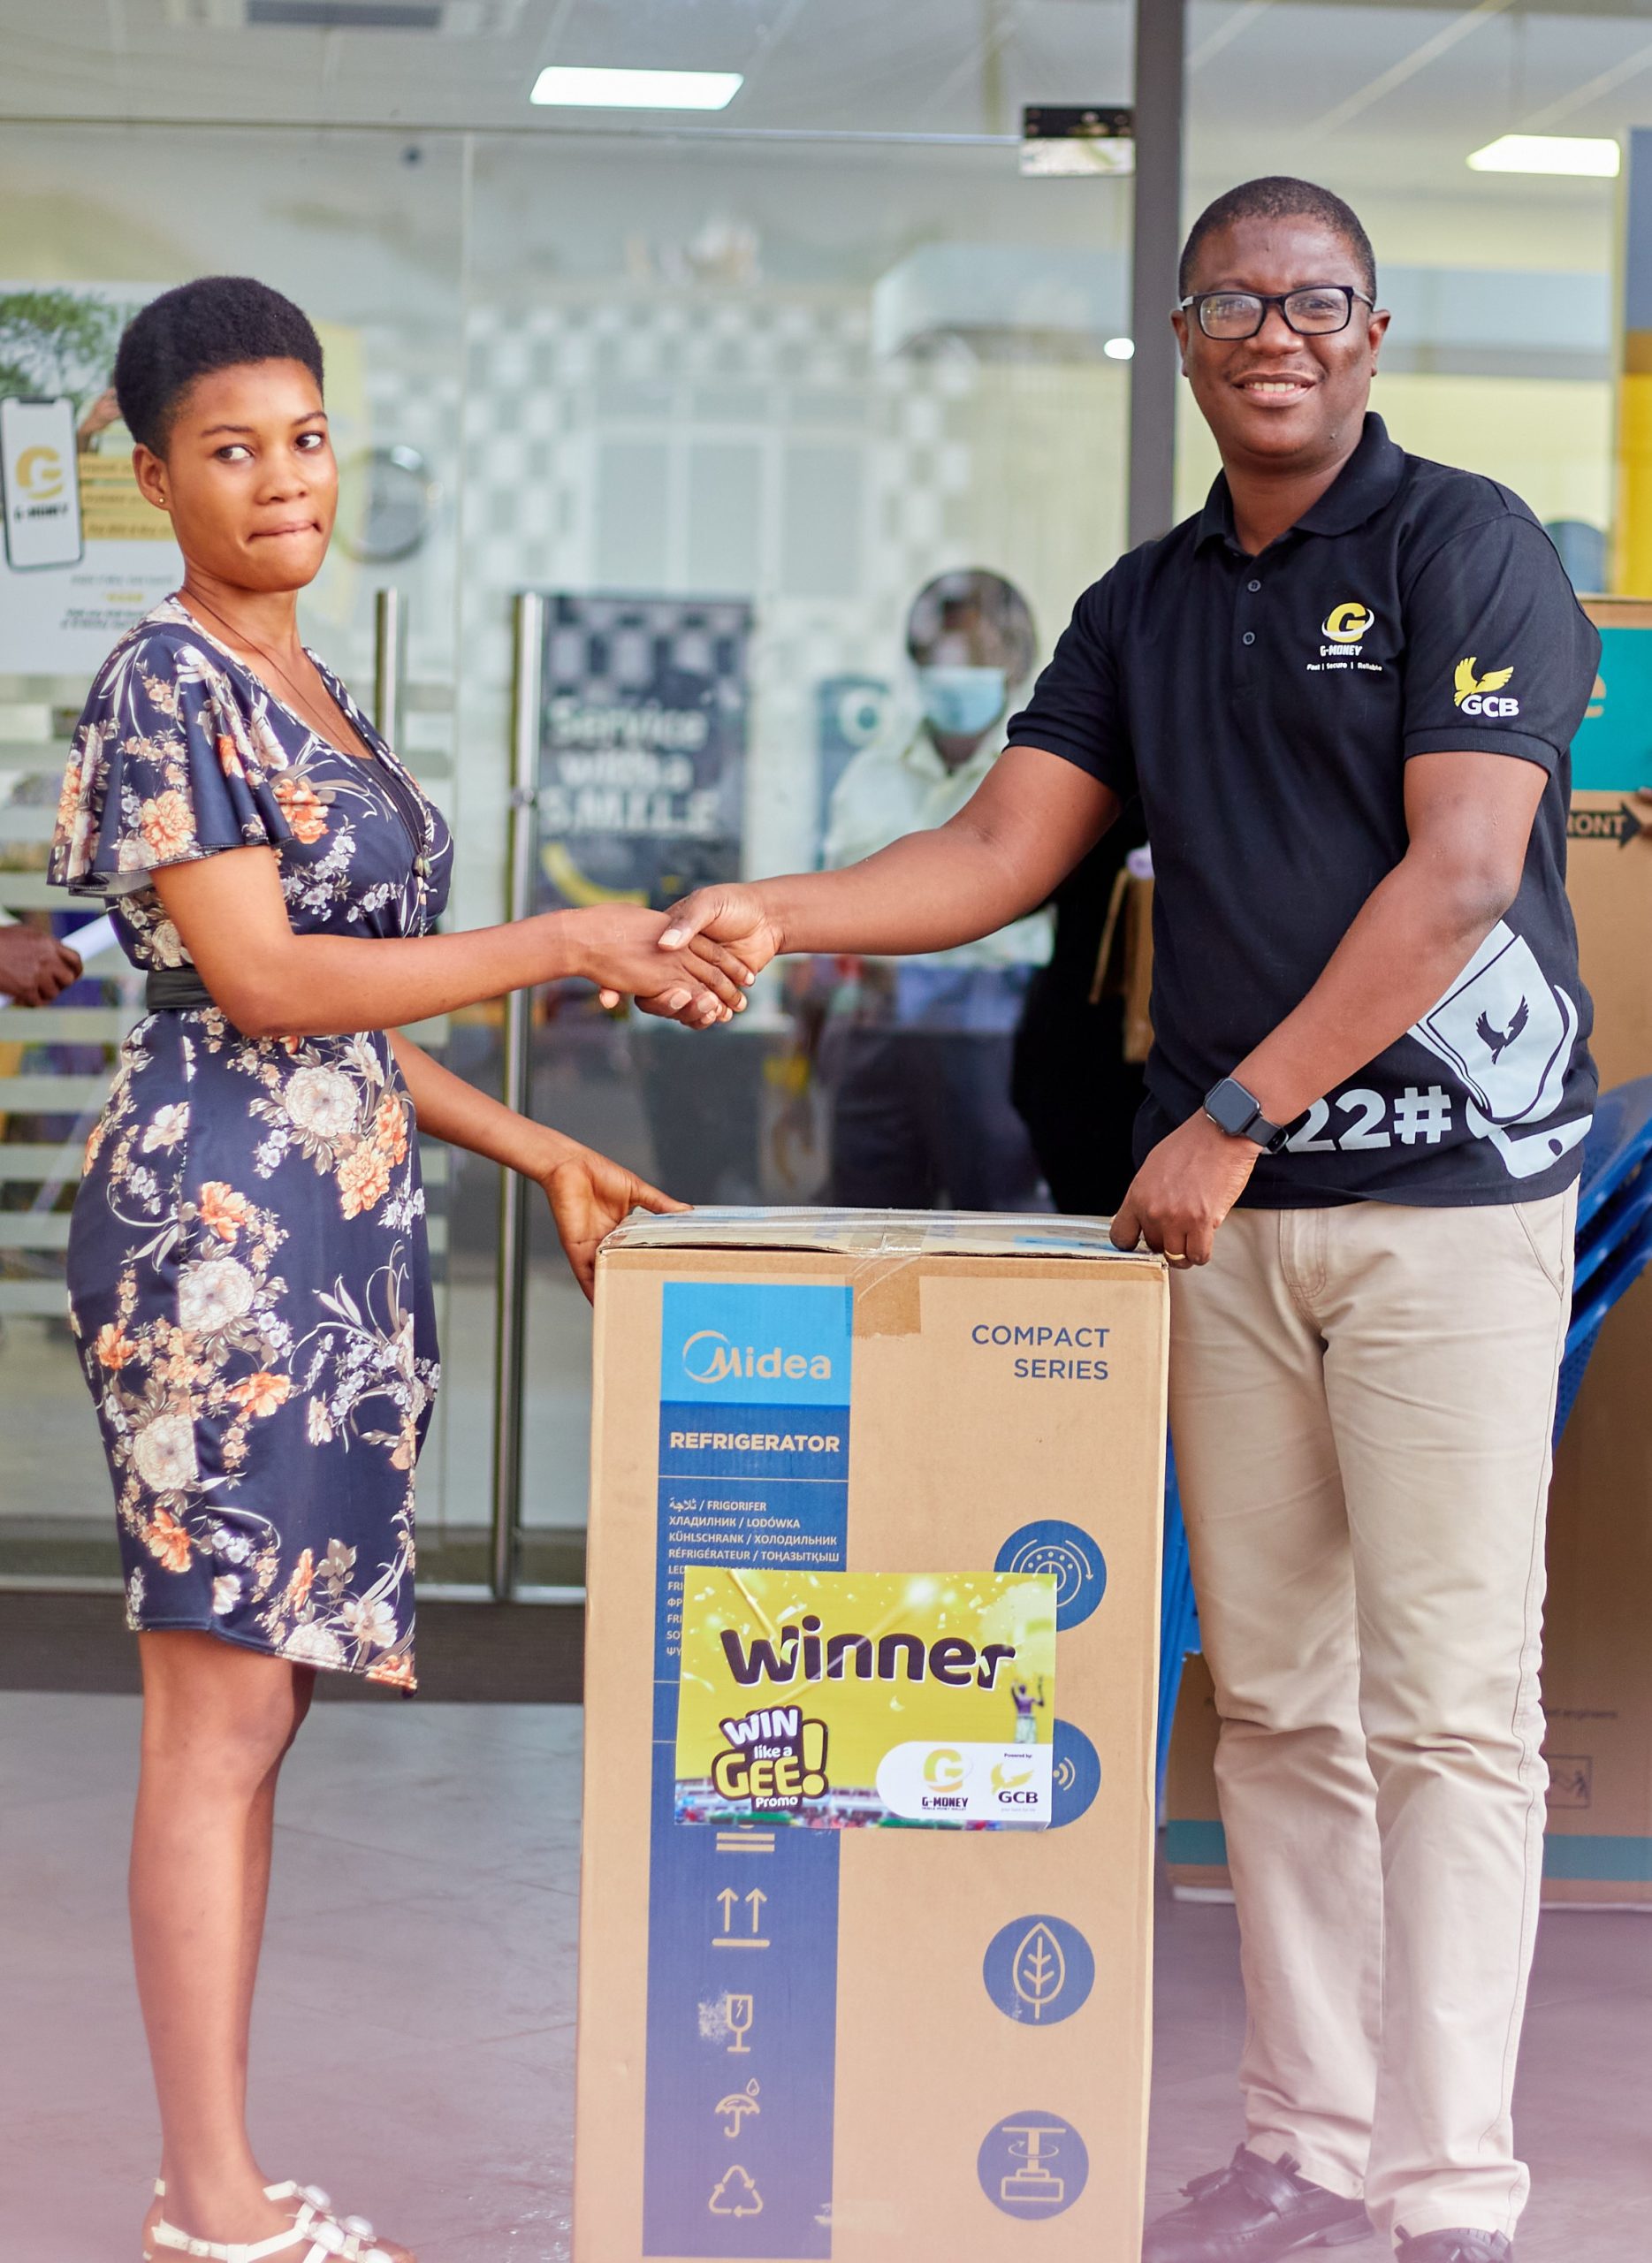 Over 40 customers, agents rewarded in G-Money’s ‘Win like a Gee’ promo